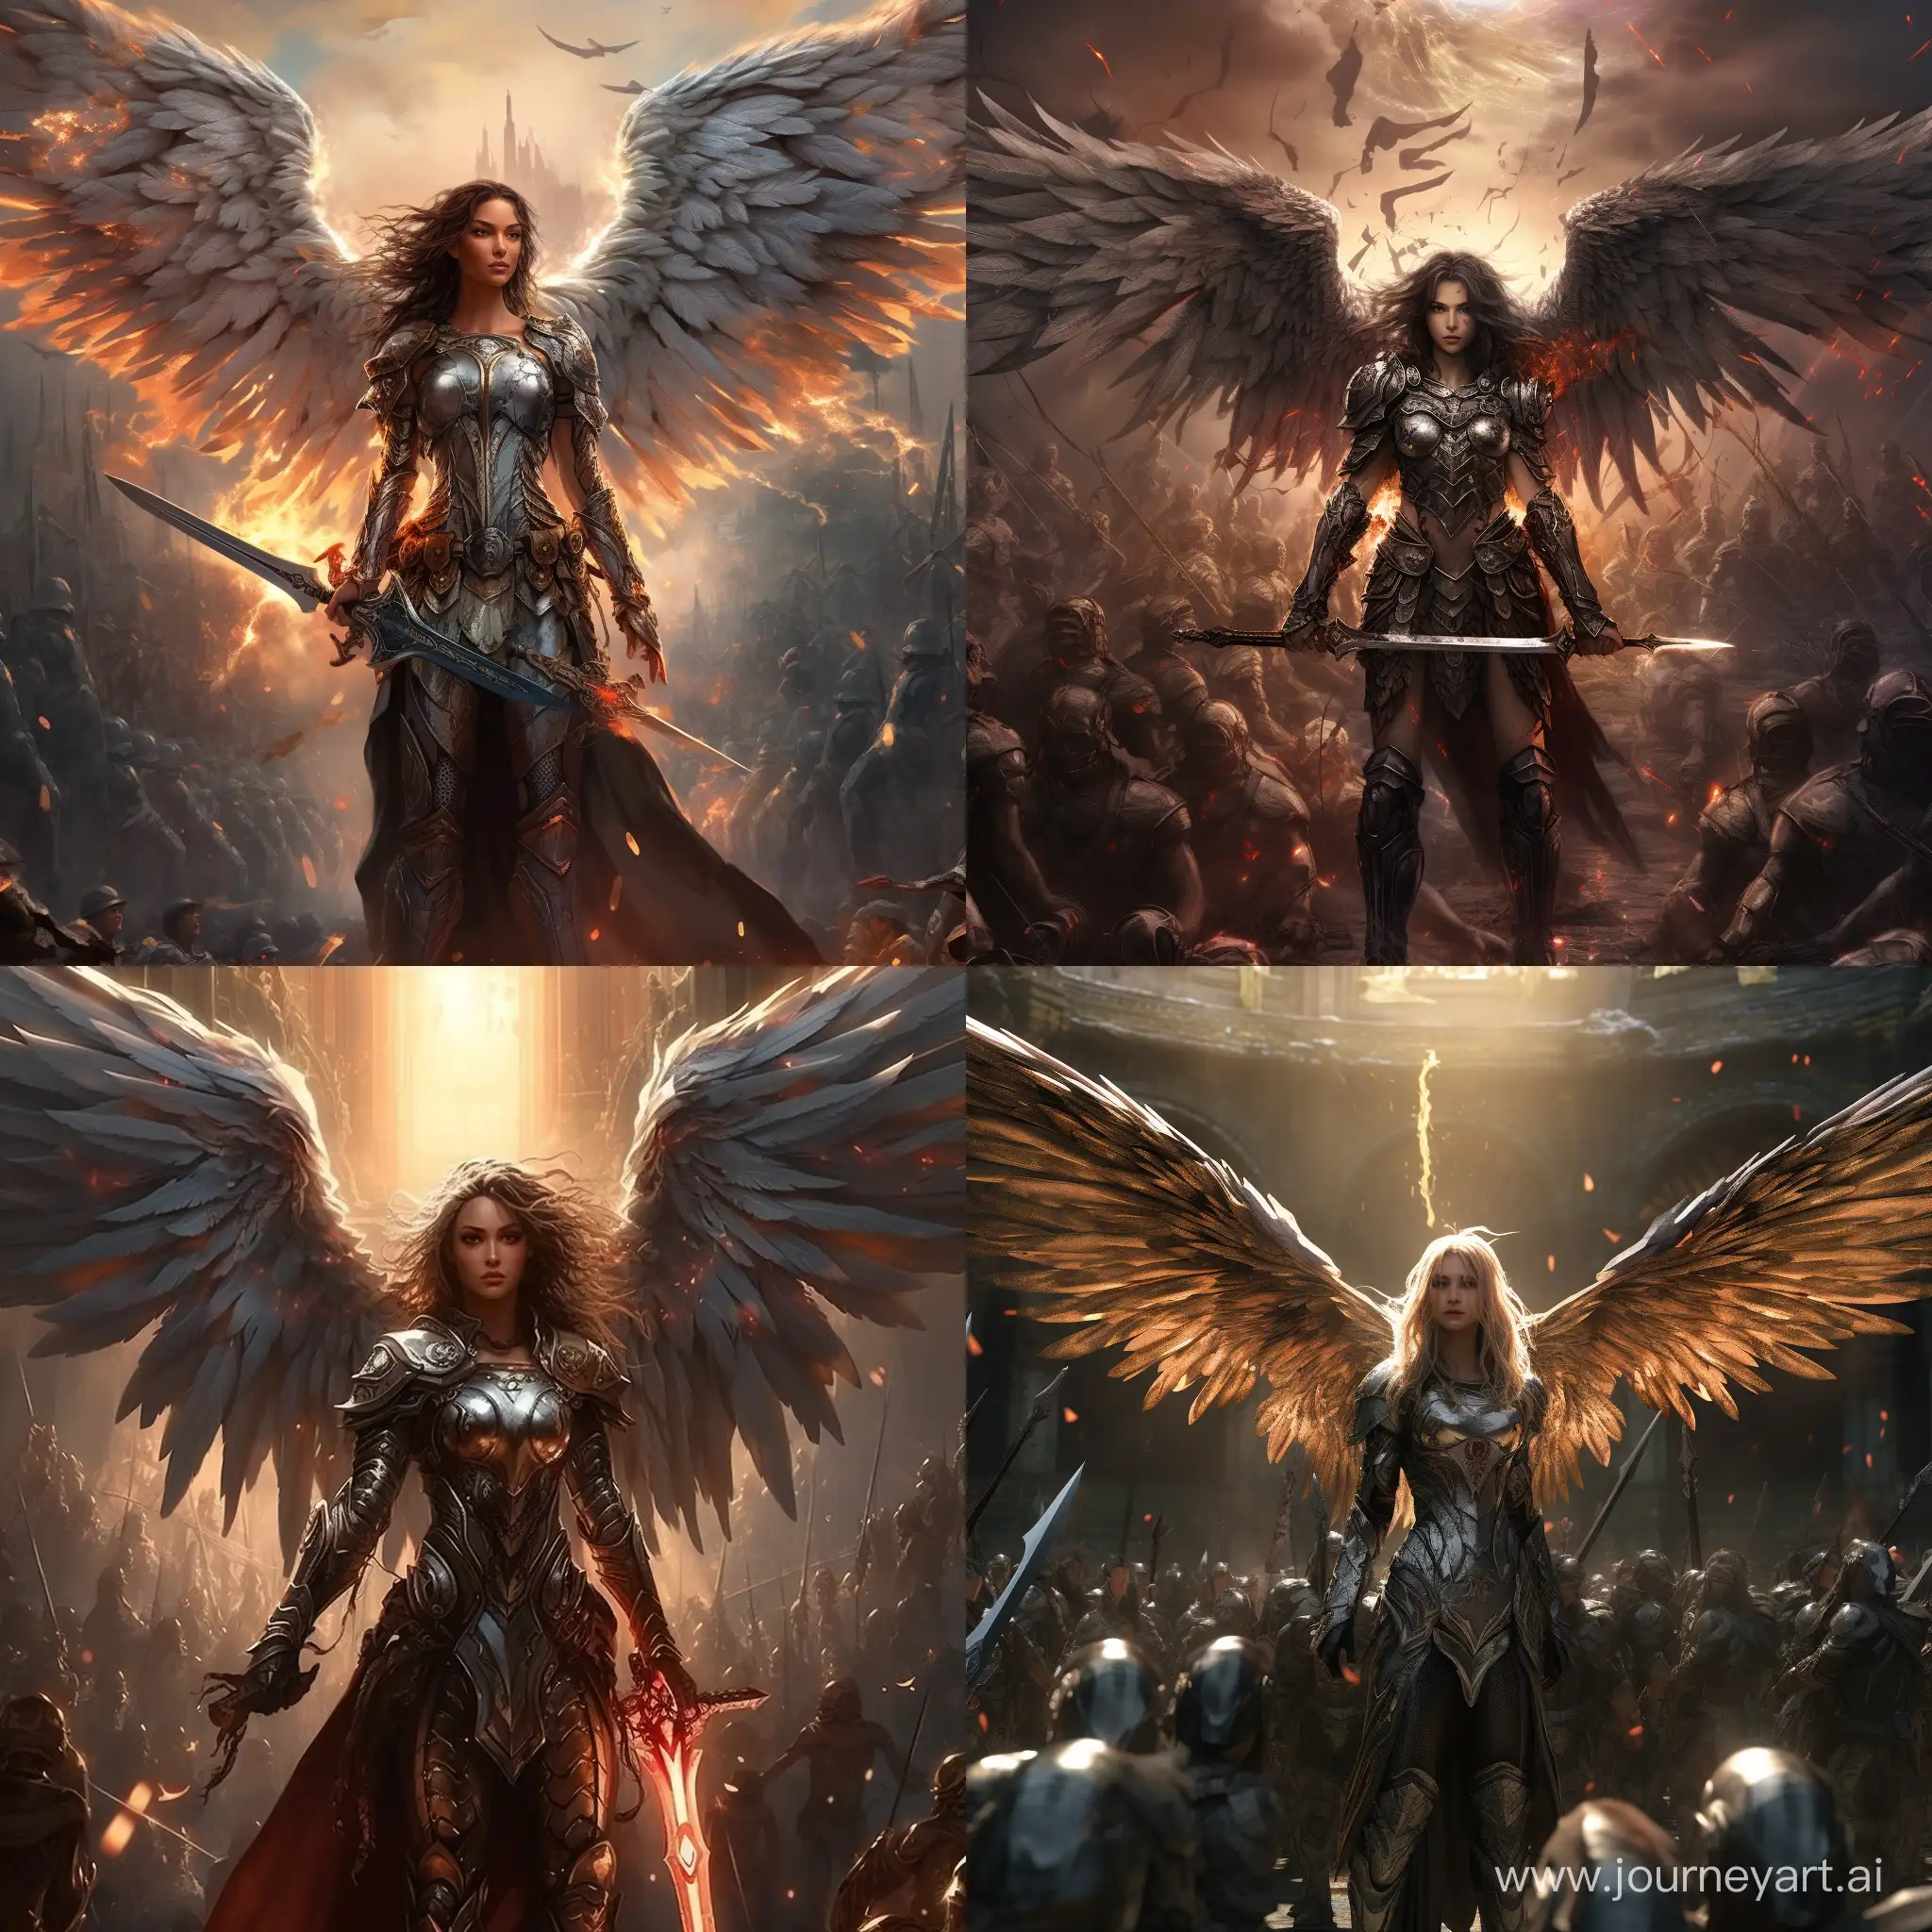 A Holy Female winged Knight in a high Fantasy setting leading a holy army in battle holding a epic weapon in a realistic epic artstyle 